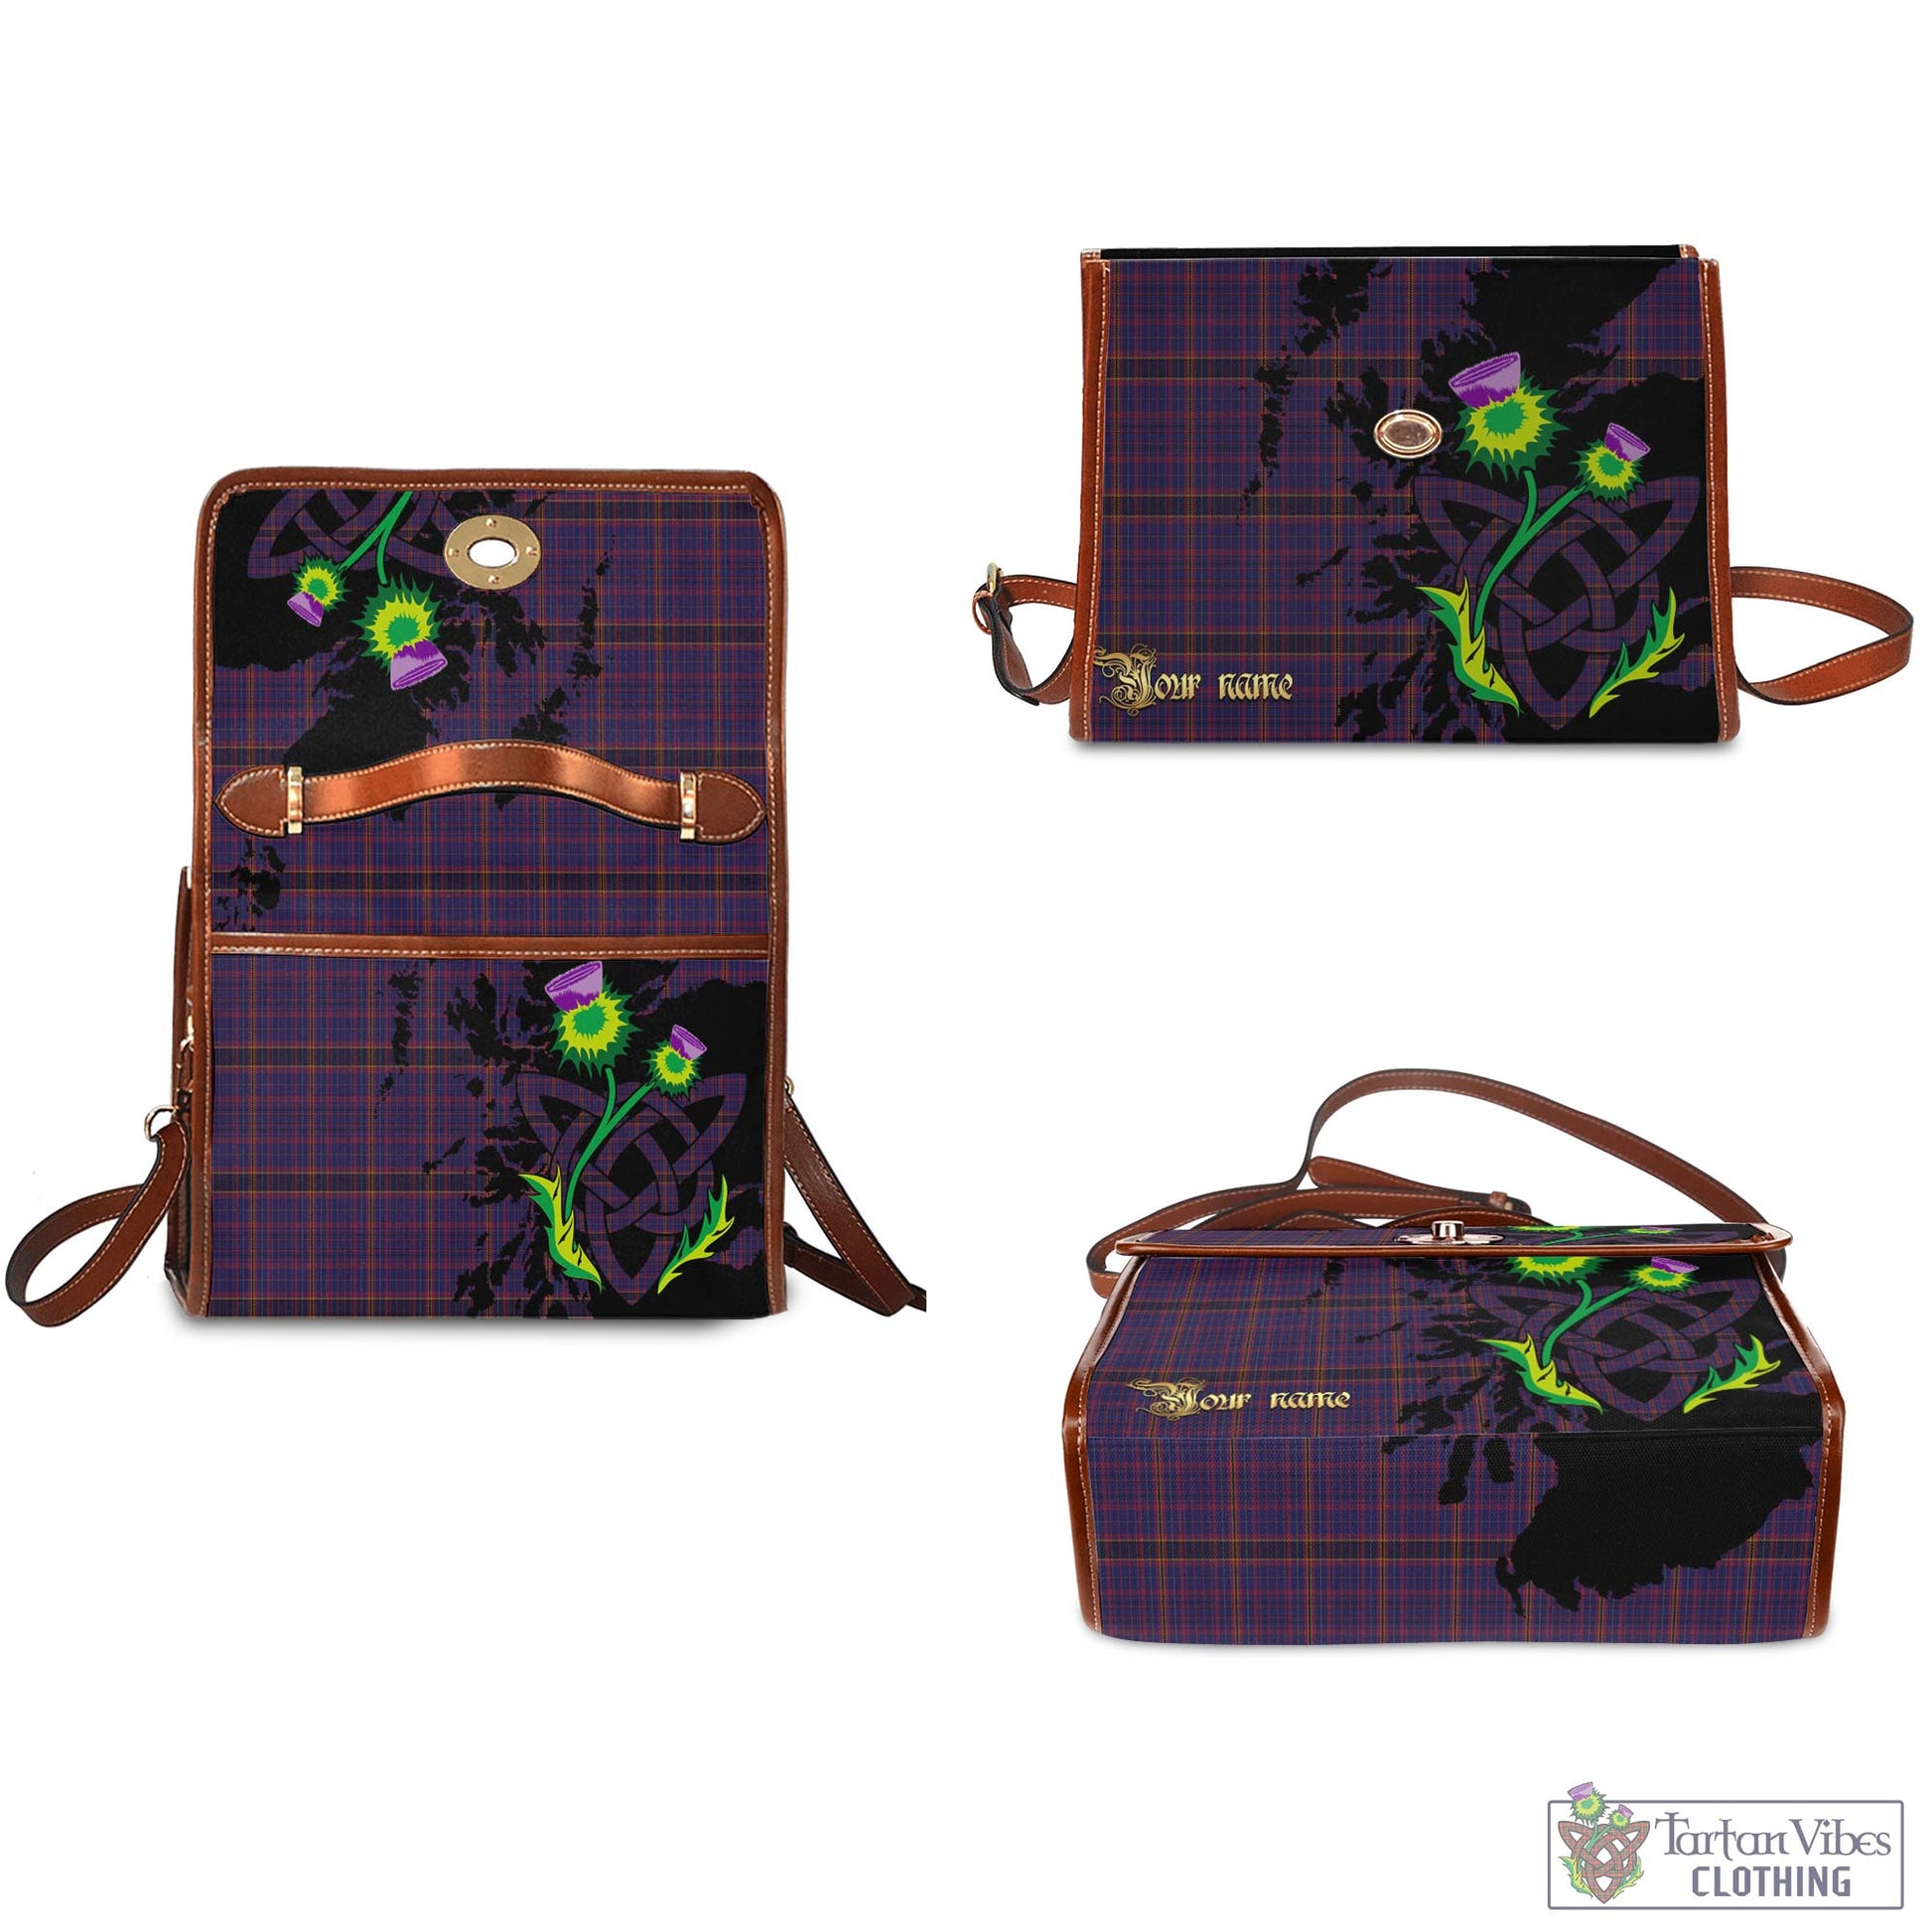 Tartan Vibes Clothing James of Wales Tartan Waterproof Canvas Bag with Scotland Map and Thistle Celtic Accents